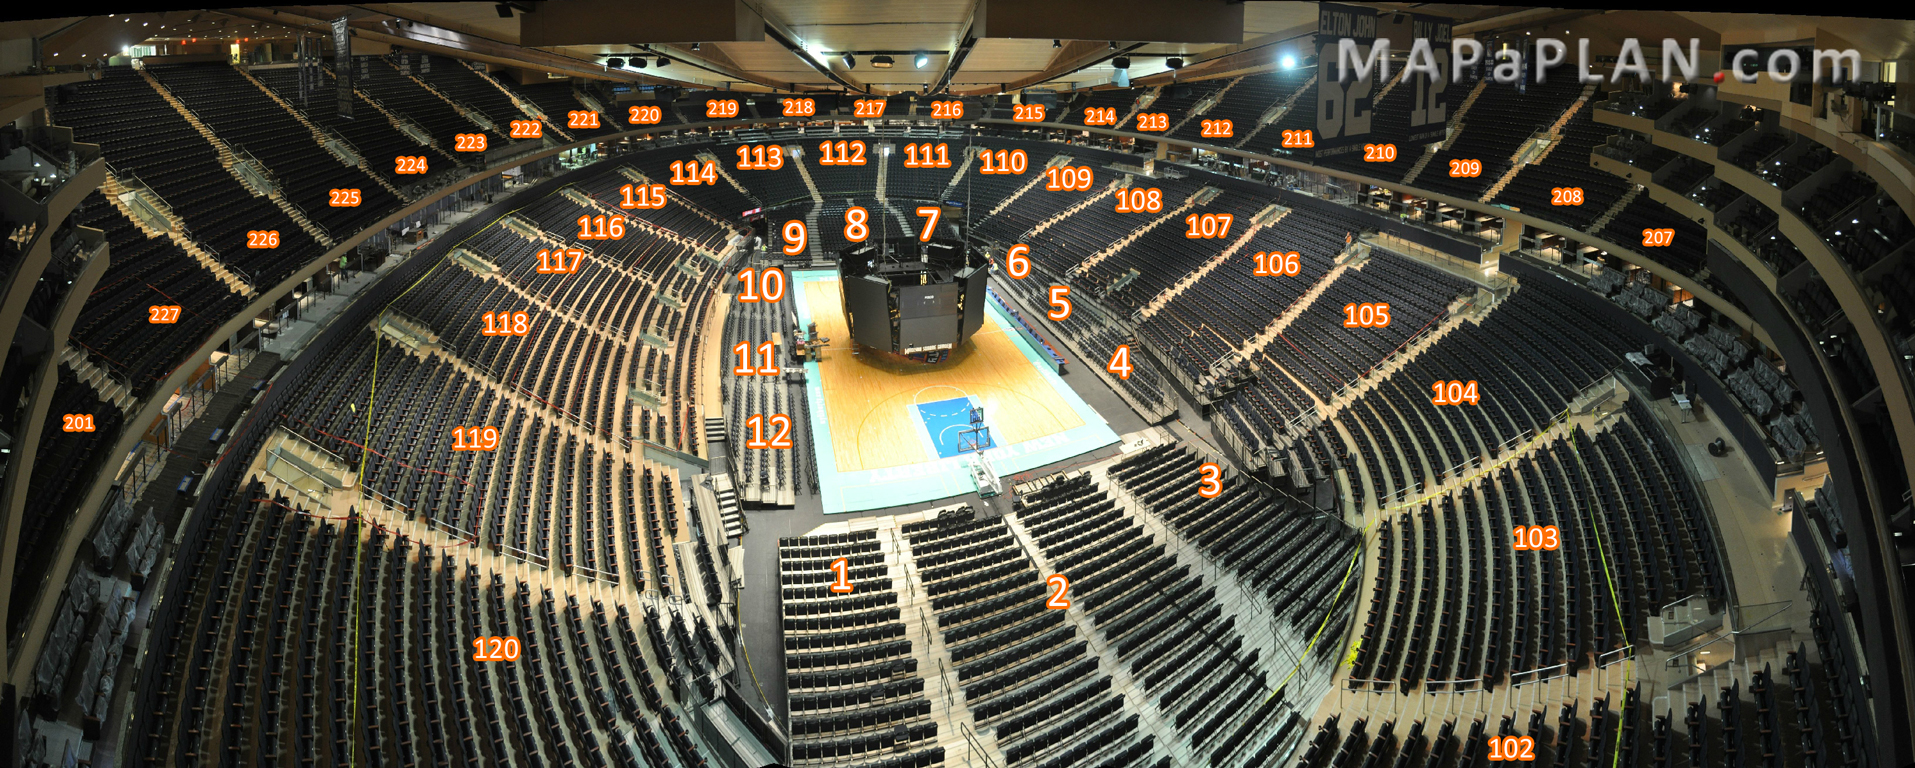 Madison Square Garden Seating Chart Interactive 3d Panoramic